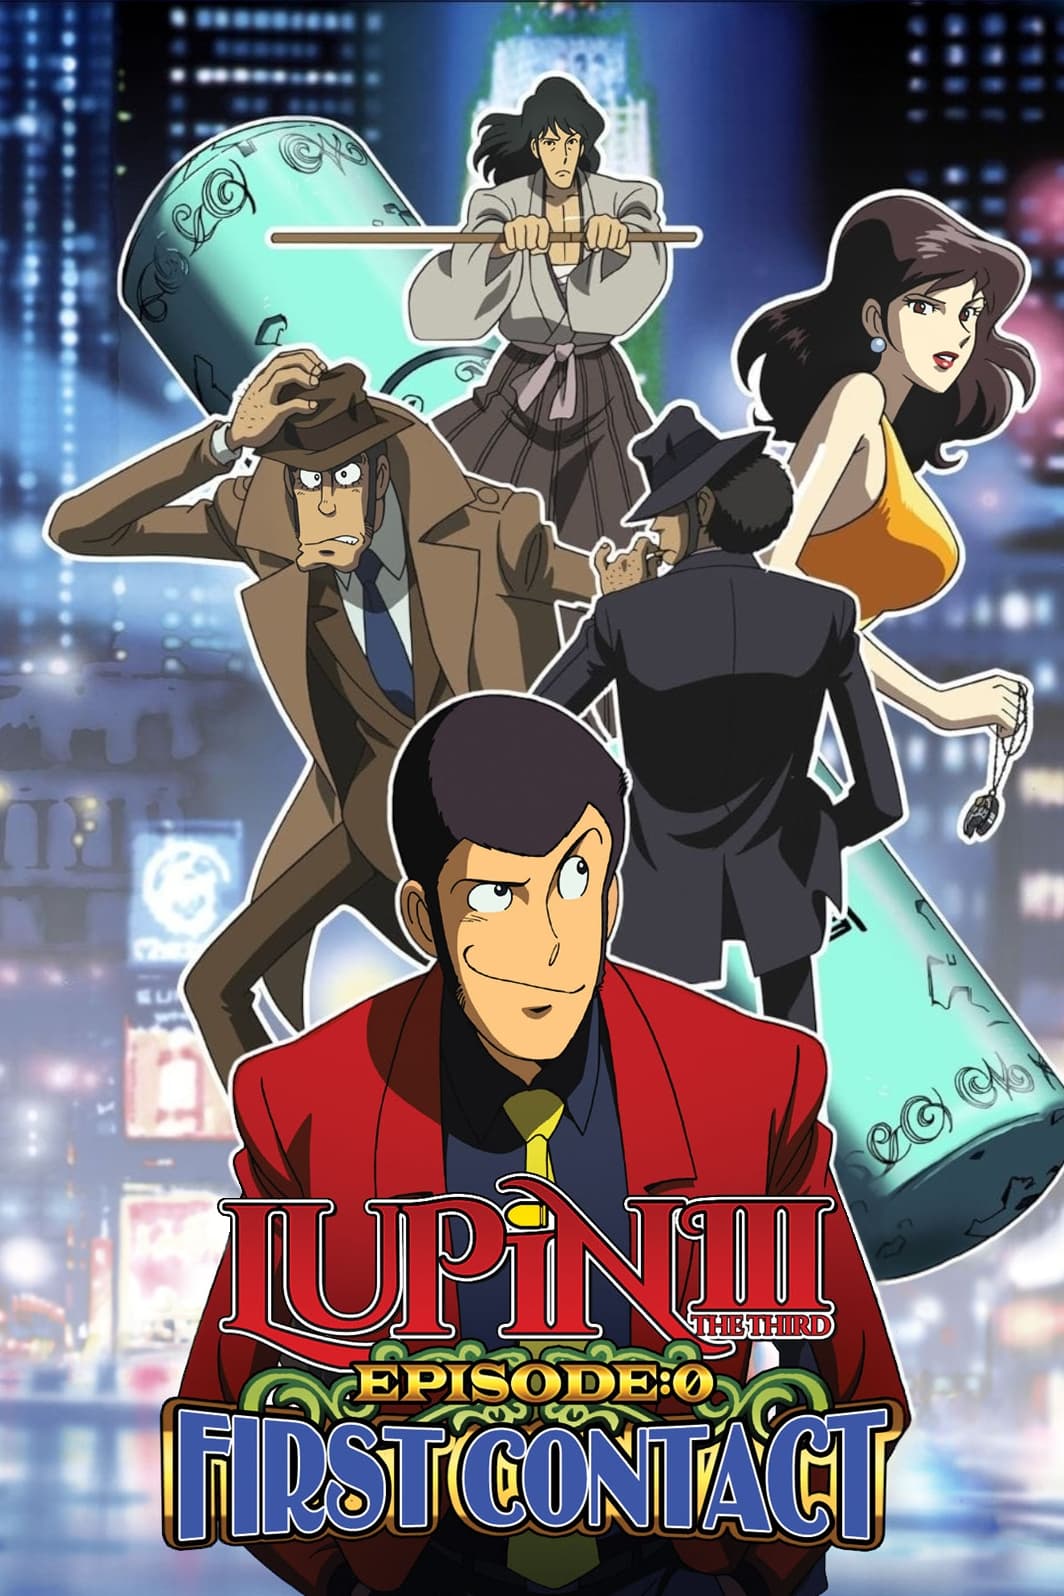 Lupin the Third: Episode 0: First Contact (2002)